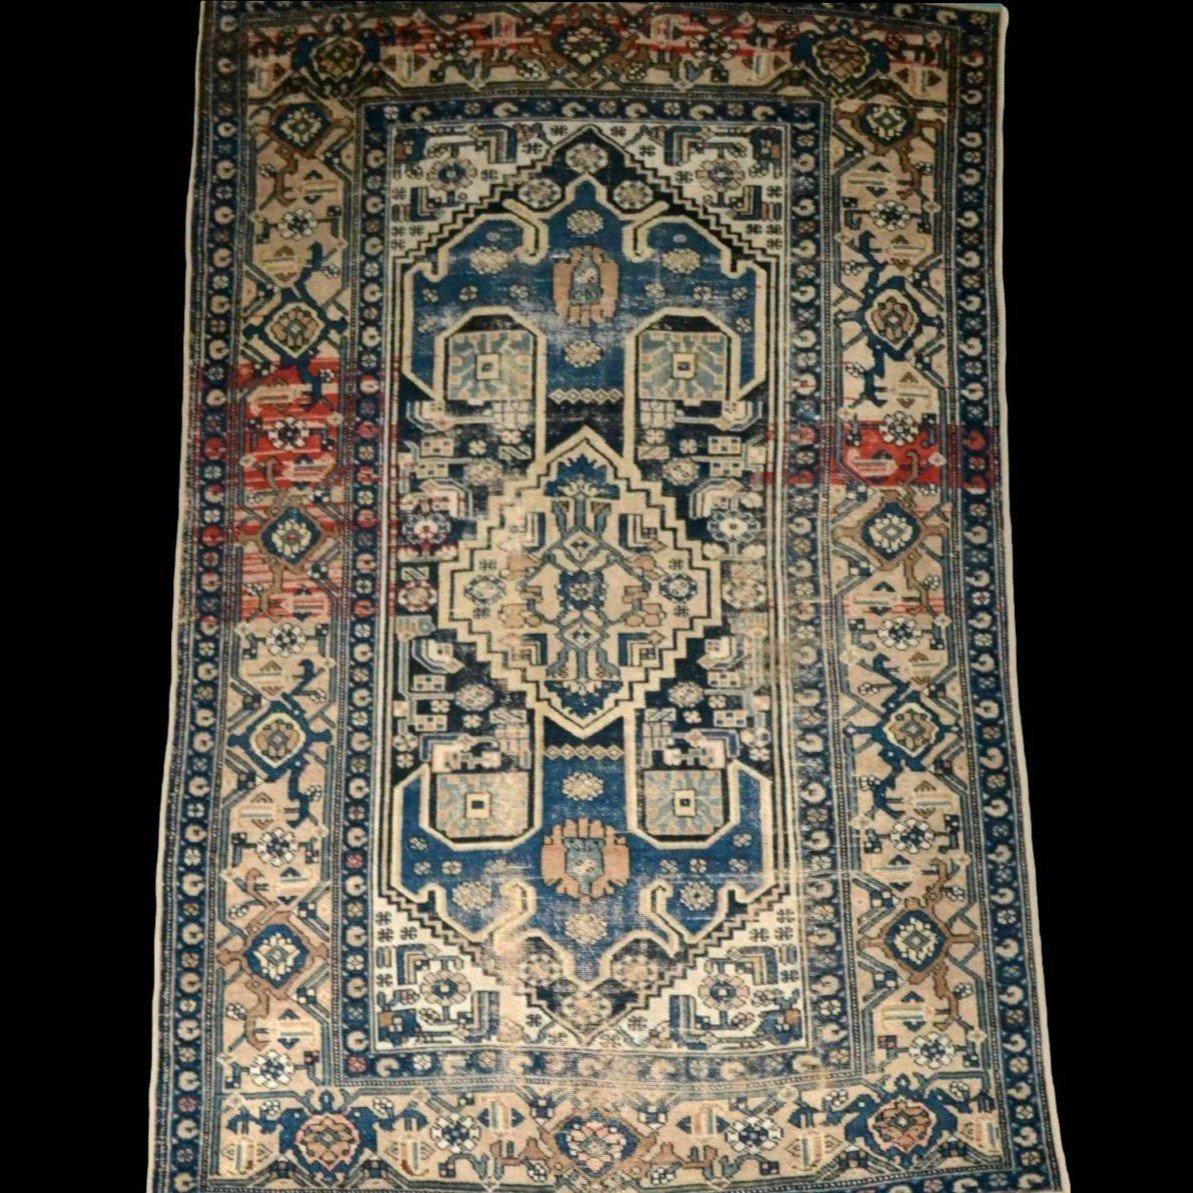 Old Malayer Rug, 137 X 202 Cm, Hand-knotted Wool In Persia, Iran, Early 20th Century